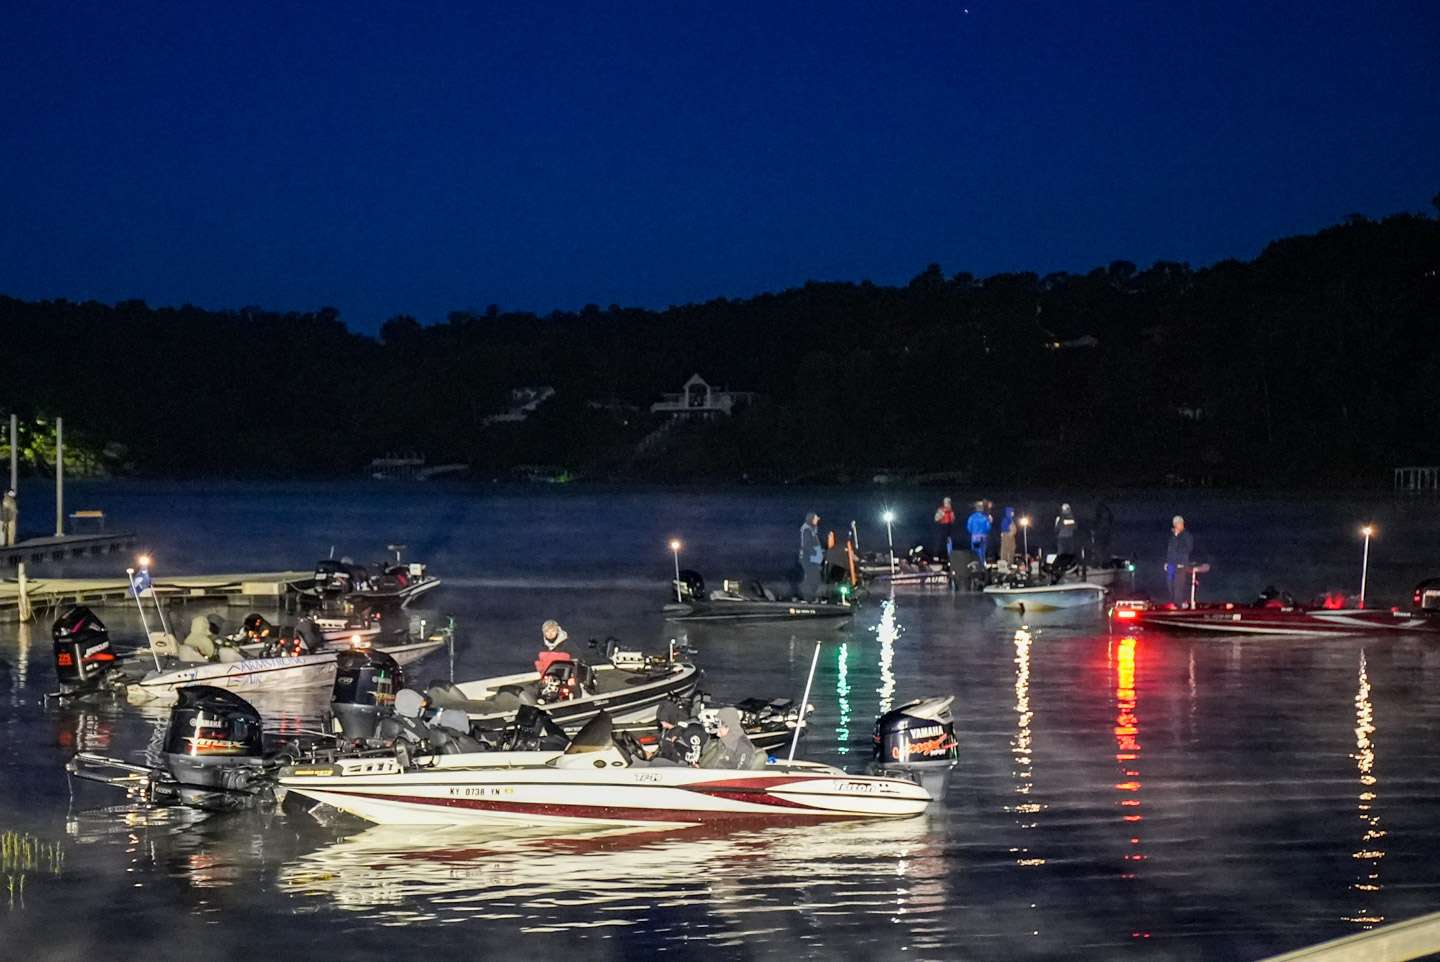 See the scenes from takeoff of Day 1 of the Carhartt Bassmaster College Series at Smith Lake presented by Bass Pro Shops! 